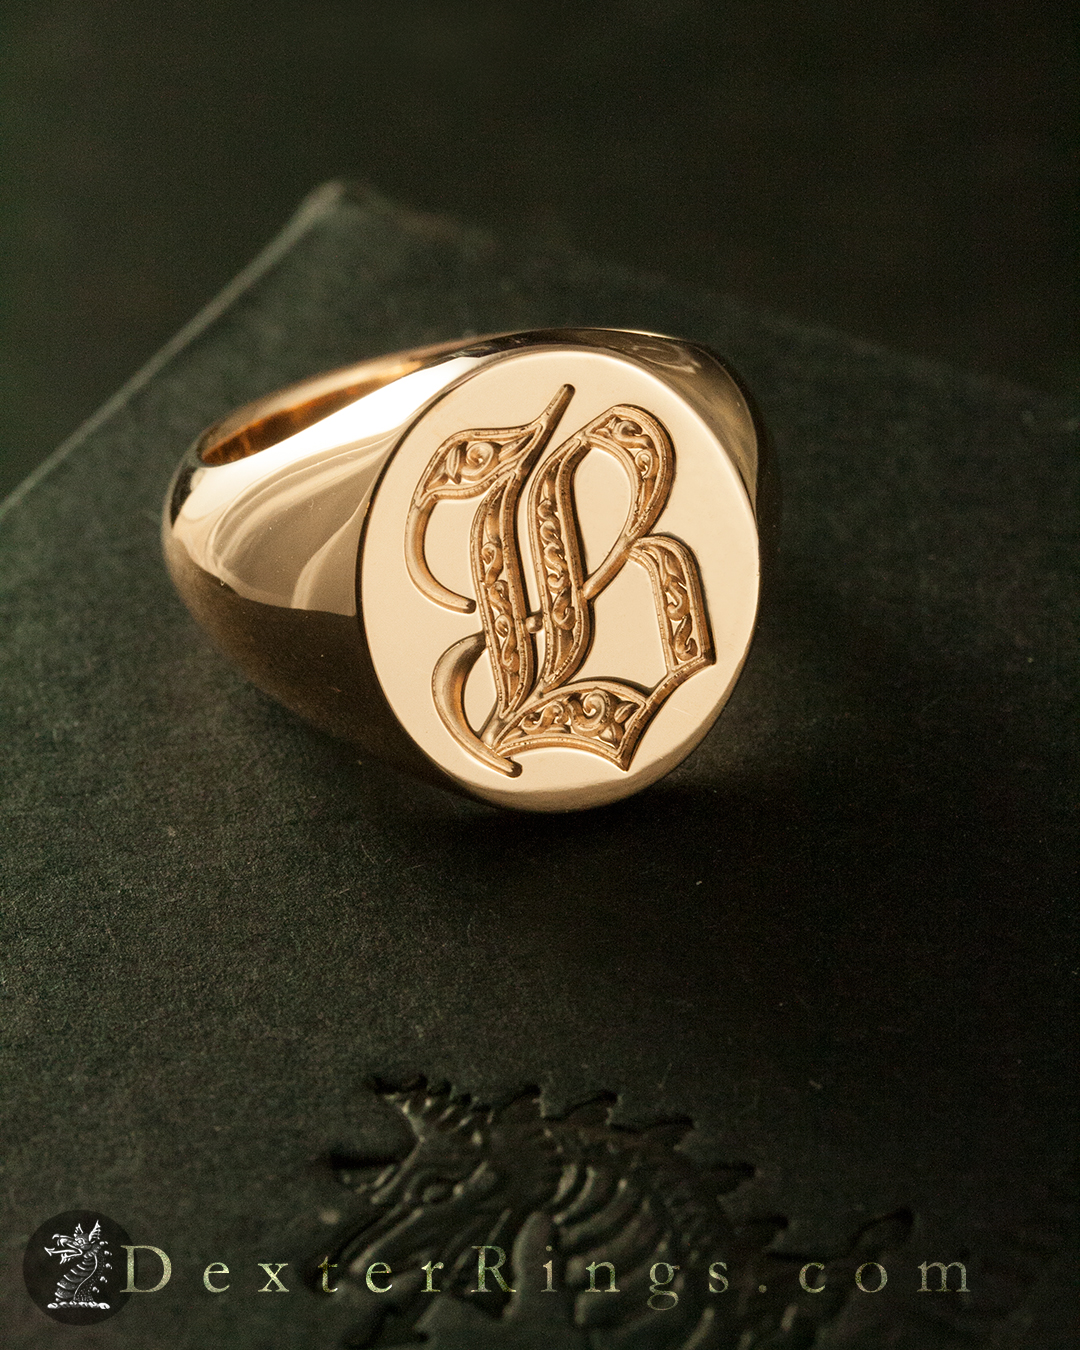 Personalised Monogrammed Signet Ring | Posh Totty Designs